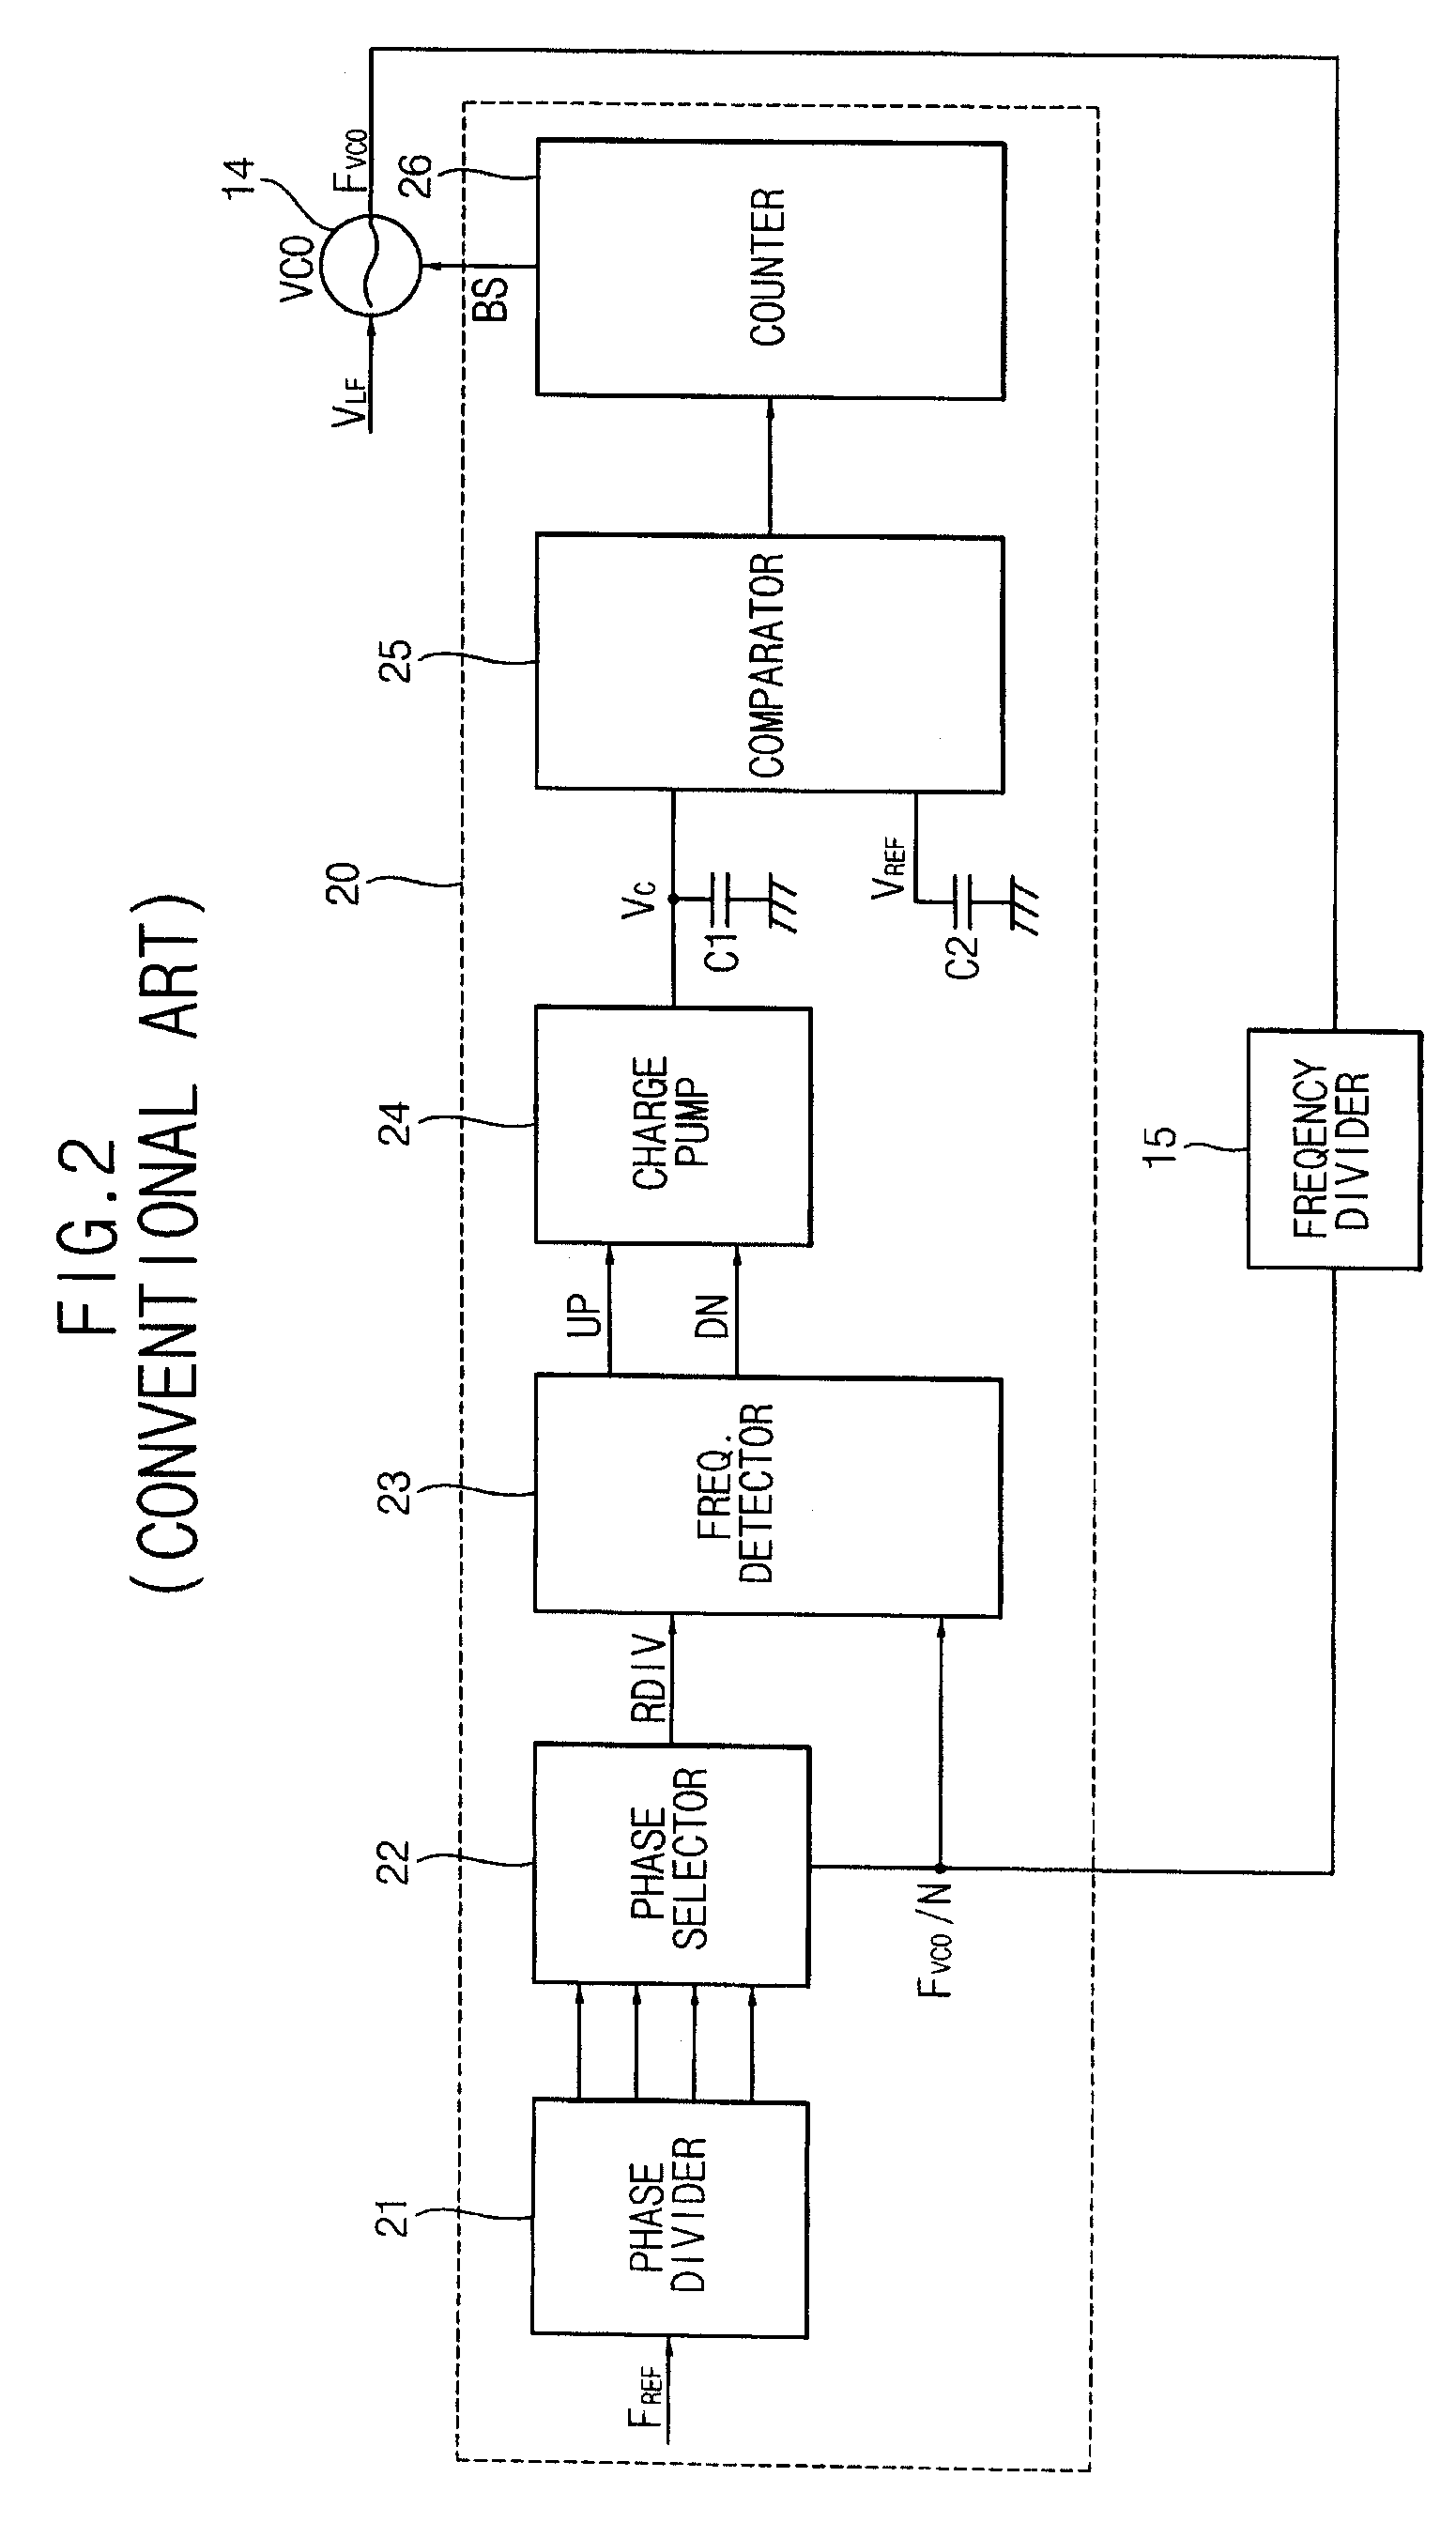 Methods of automatically calibrating frequency features of a phase locked loop, and phase locked loops including an open-loop automatic frequency calibration circuit